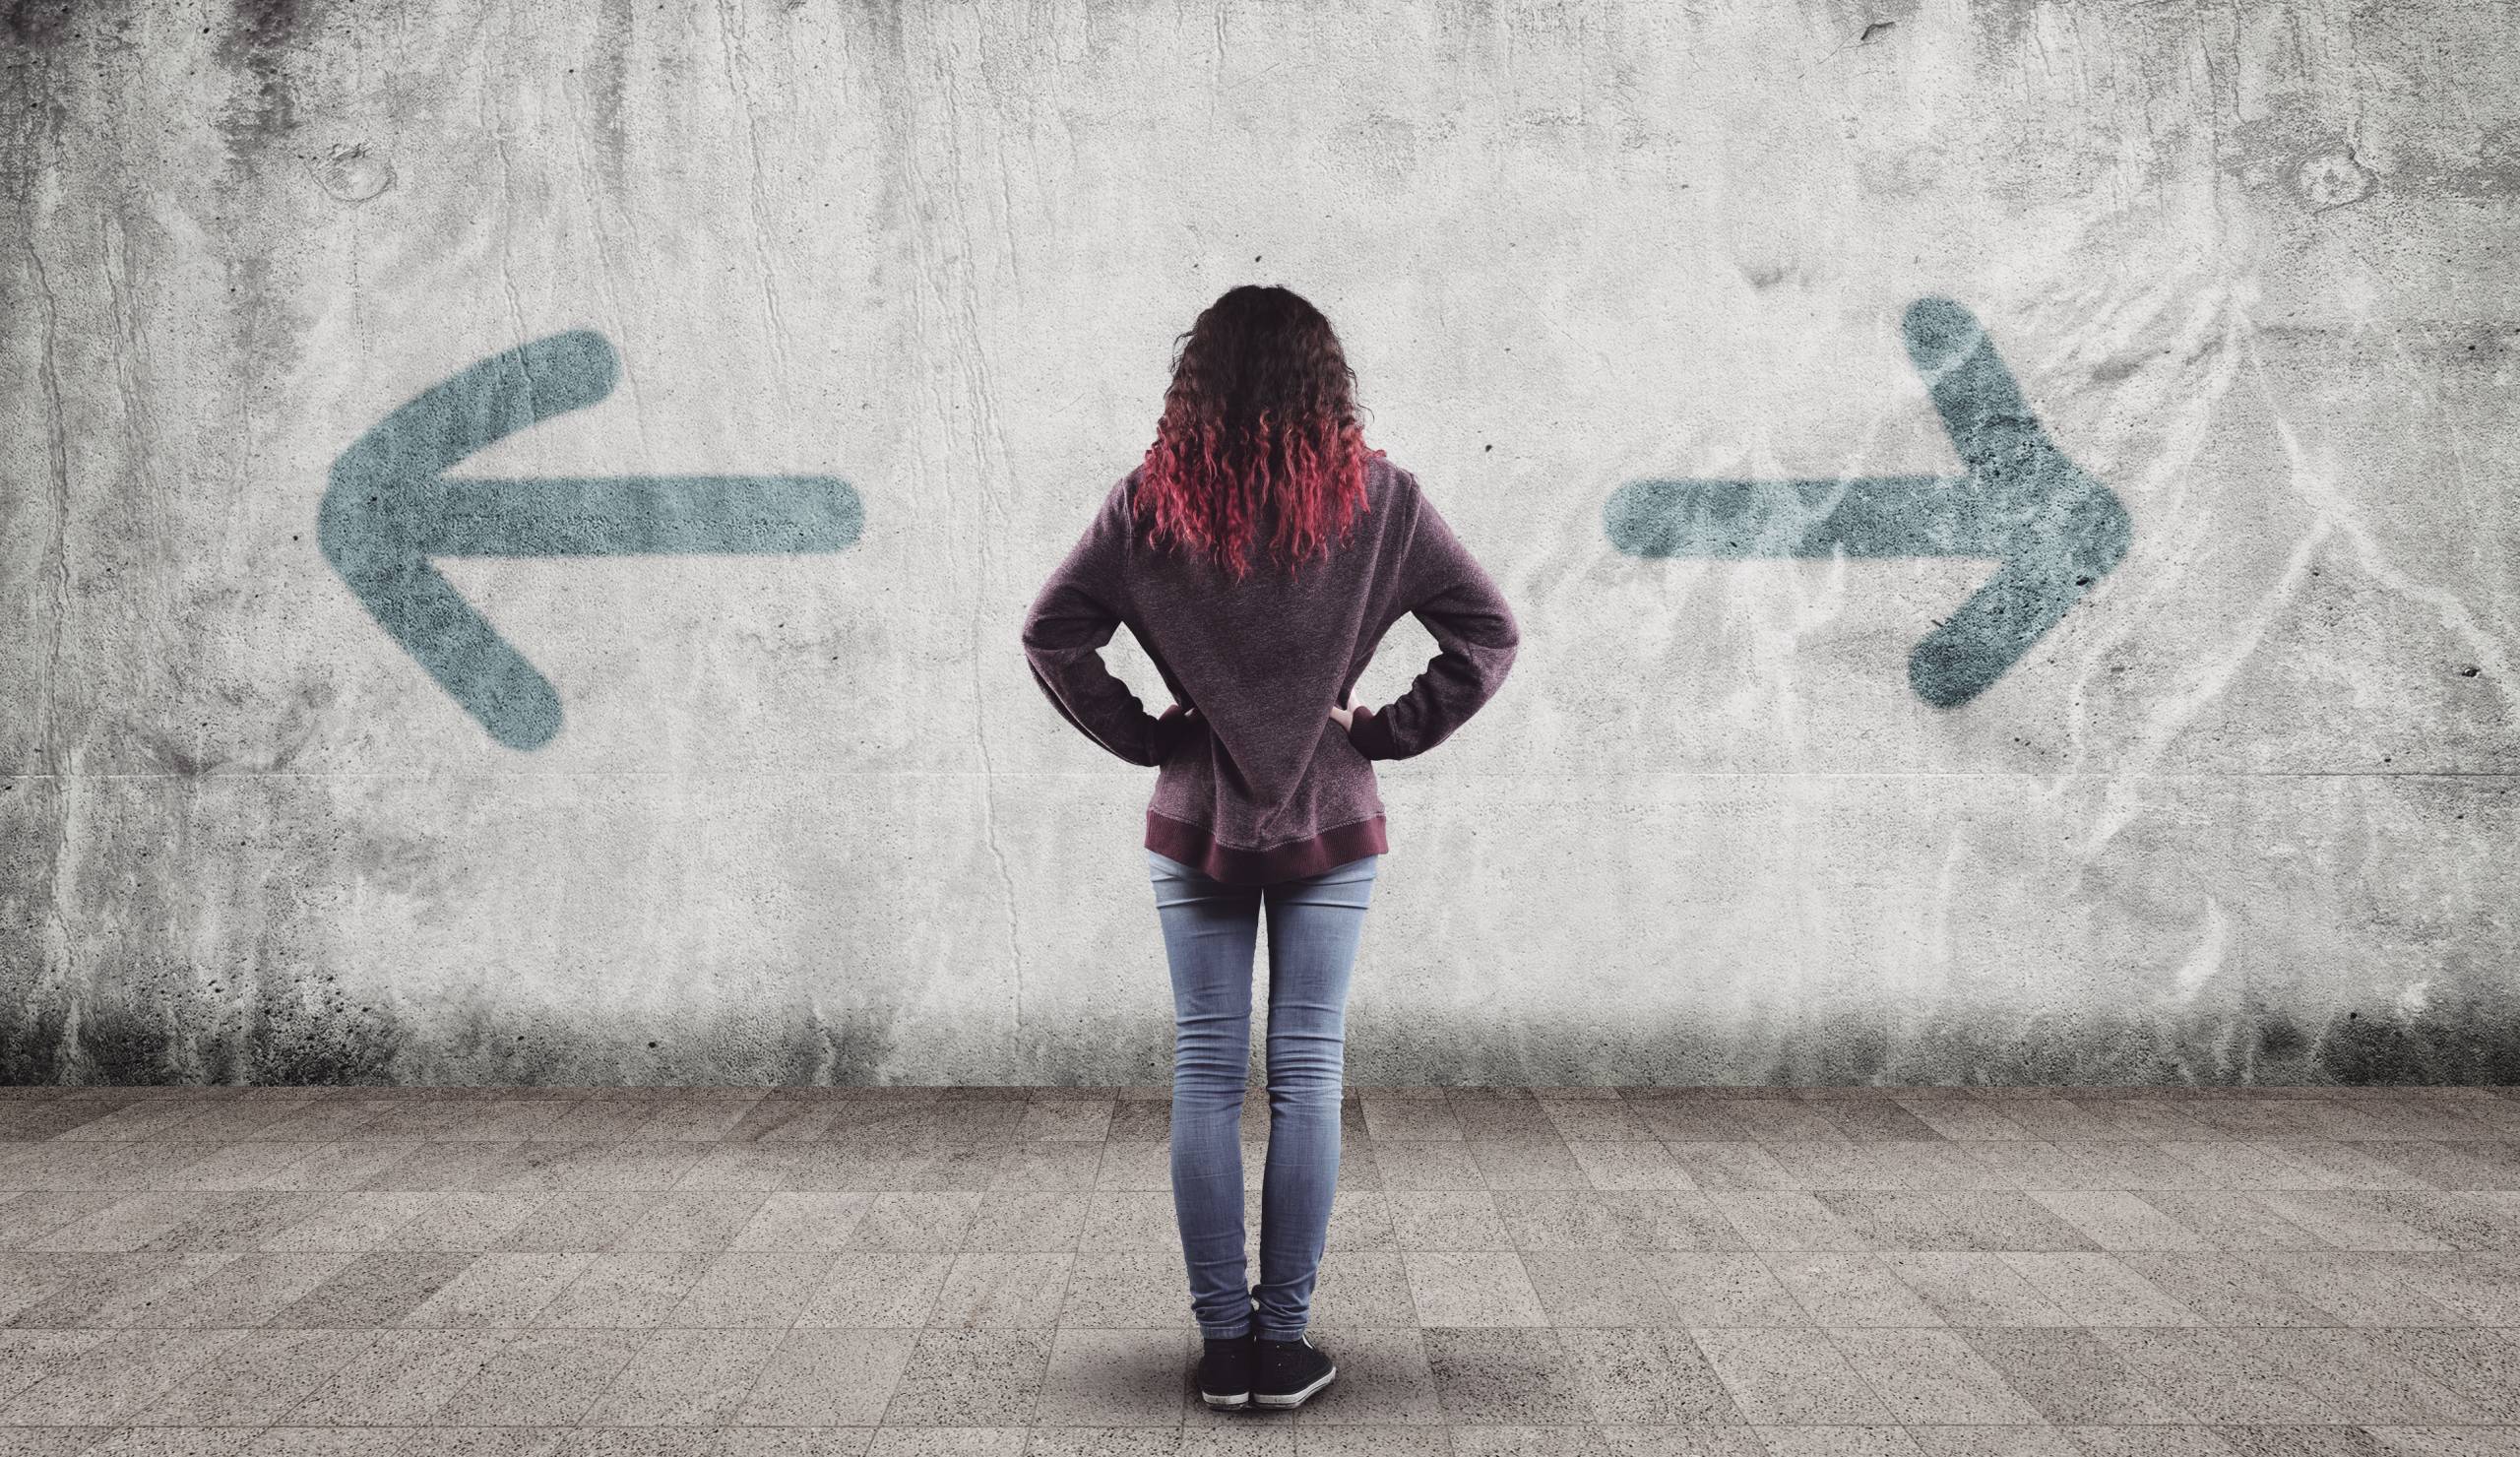 Young girl in front of a wall painted with arrows towards opposite directions.